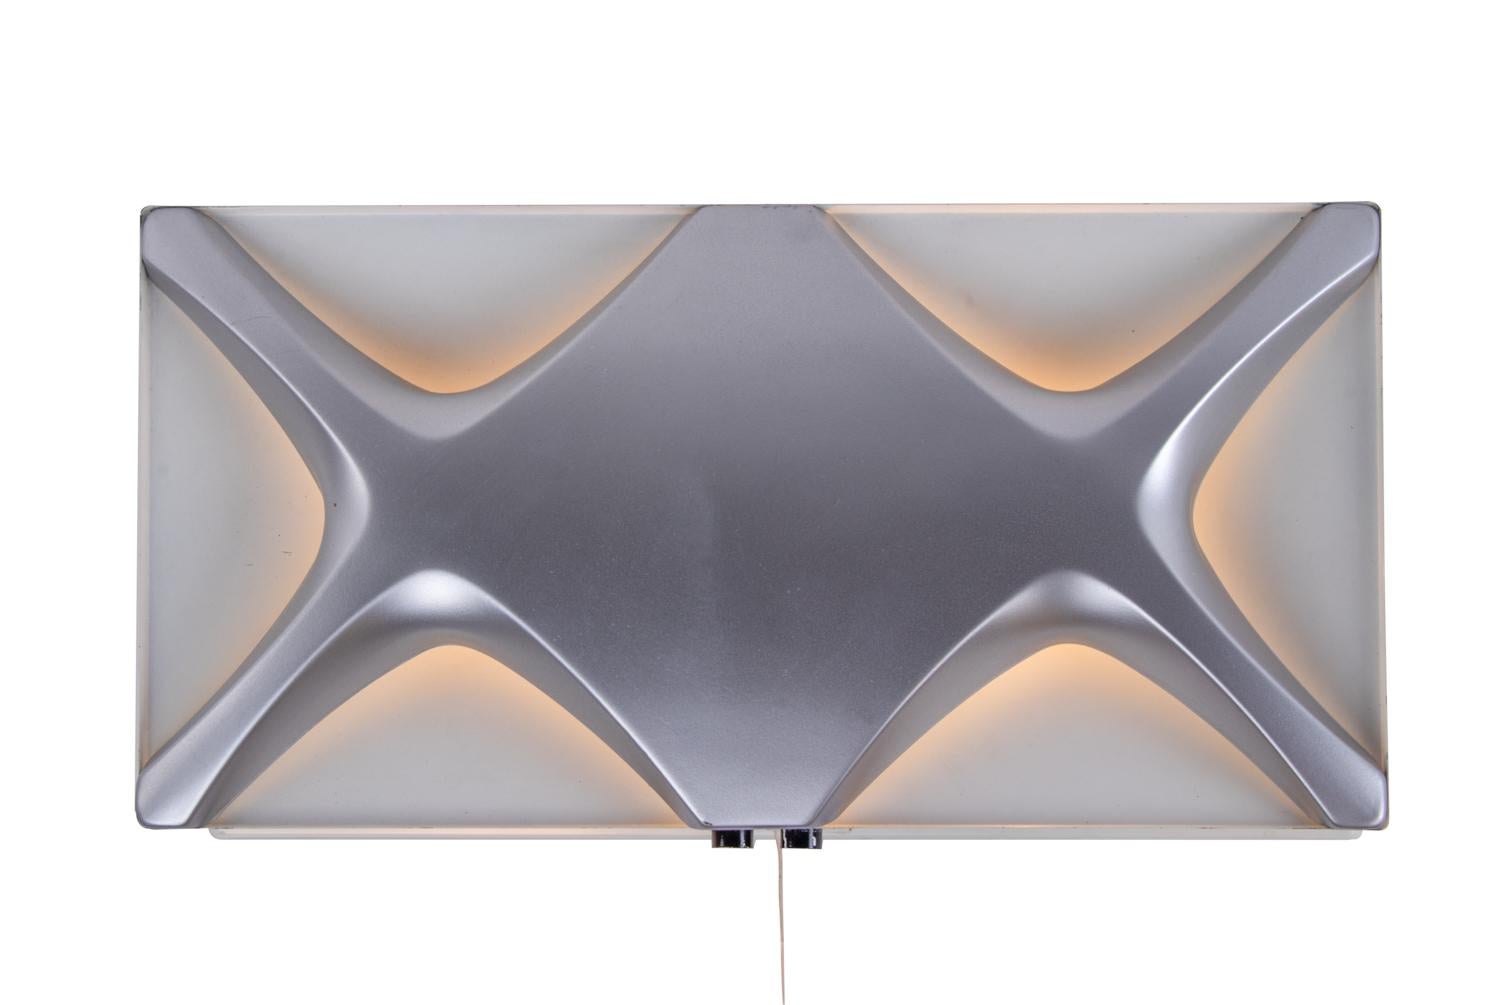 Very rare Oyster wall light made of white and silver enameled metal in the manner of Staff, Germany, 1968.
A real eye-catcher even unlit. Gem from the time.

Designer: Klaus Link.
Manufacturer: Neuhaus Lighting.
Measurements: 18.11 x 9 x 3.9 